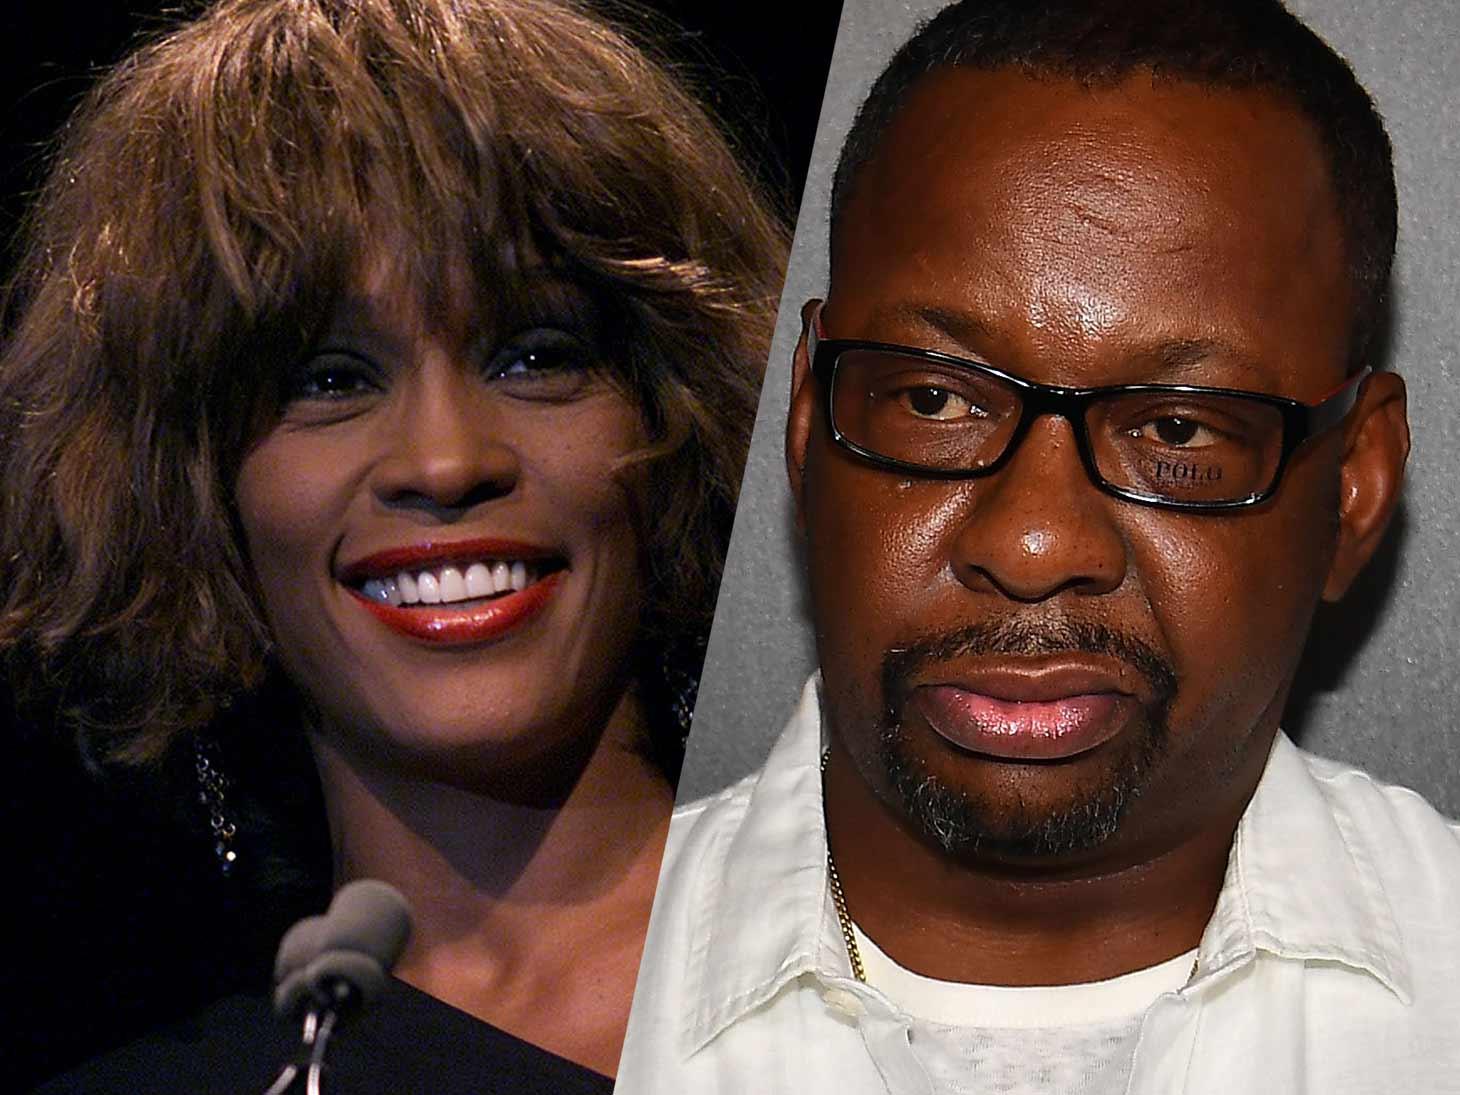 Bobby Brown Sues Showtime and BBC for $2 Million Over Whitney Houston Biopic